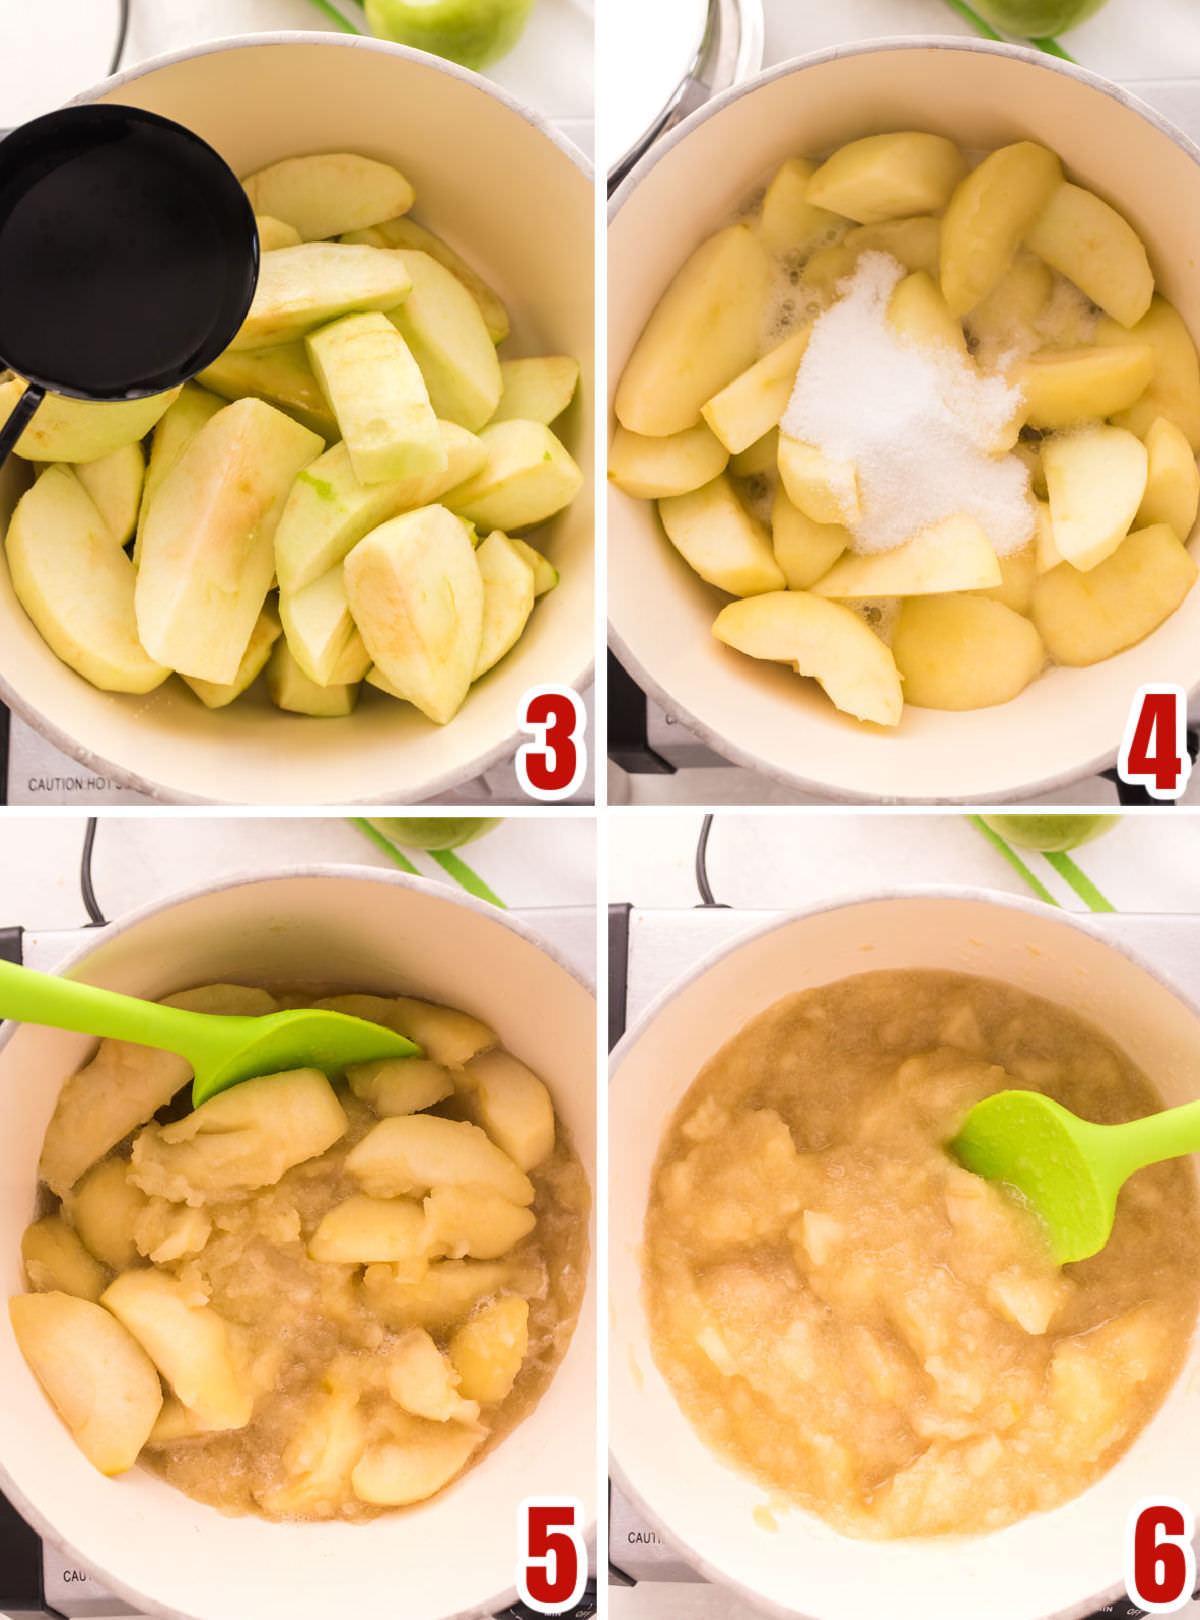 Collage image showing how to cook the apples.